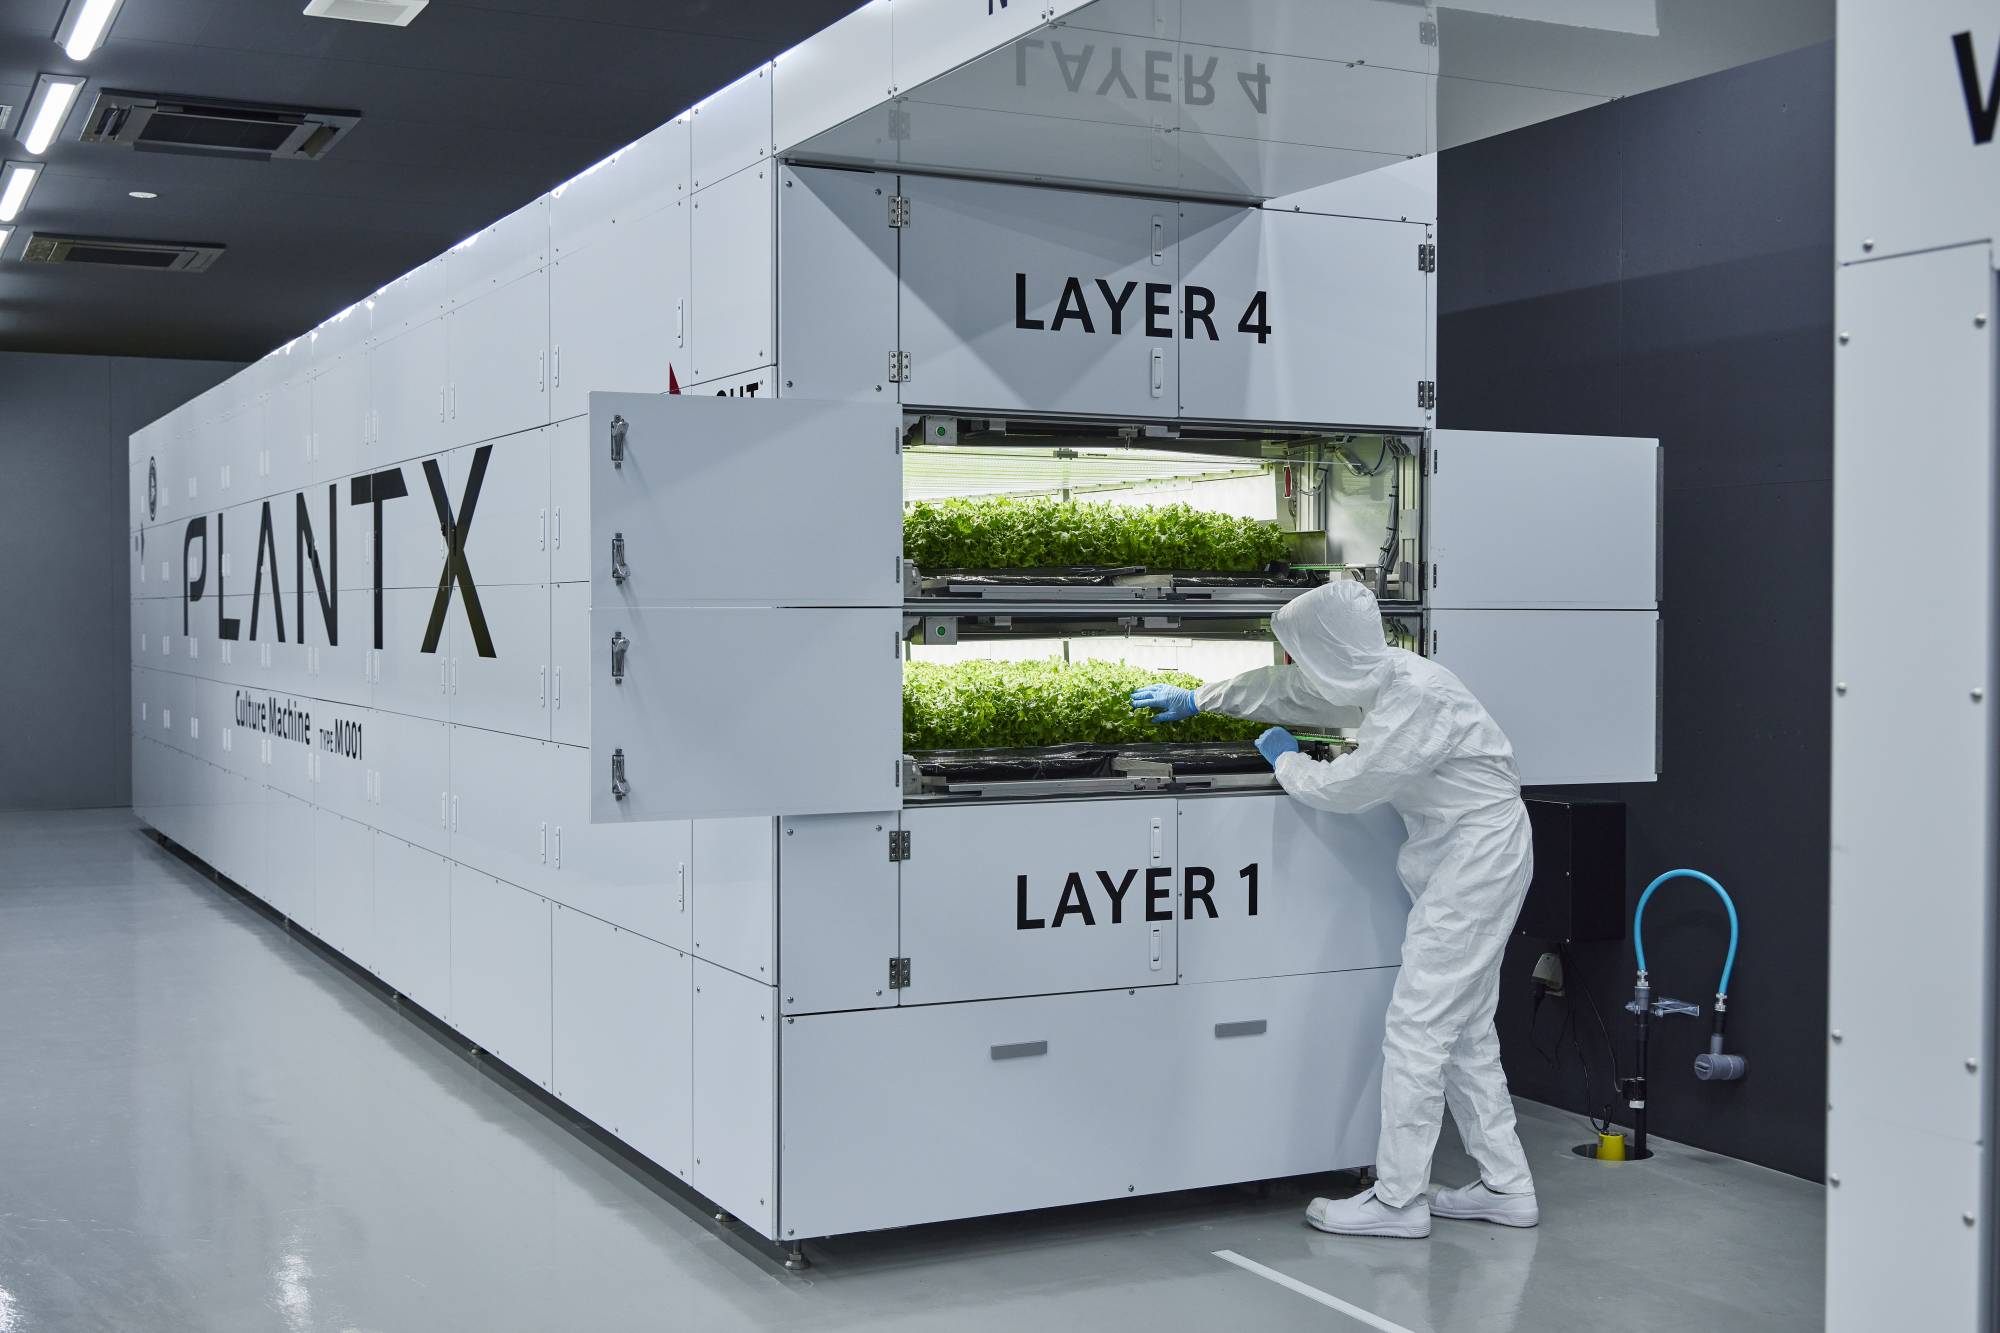 Vertical farming can drastically reduce the use of finite resources — particularly water and nutrients — compared to conventional agriculture. | COURTESY OF PLANTX